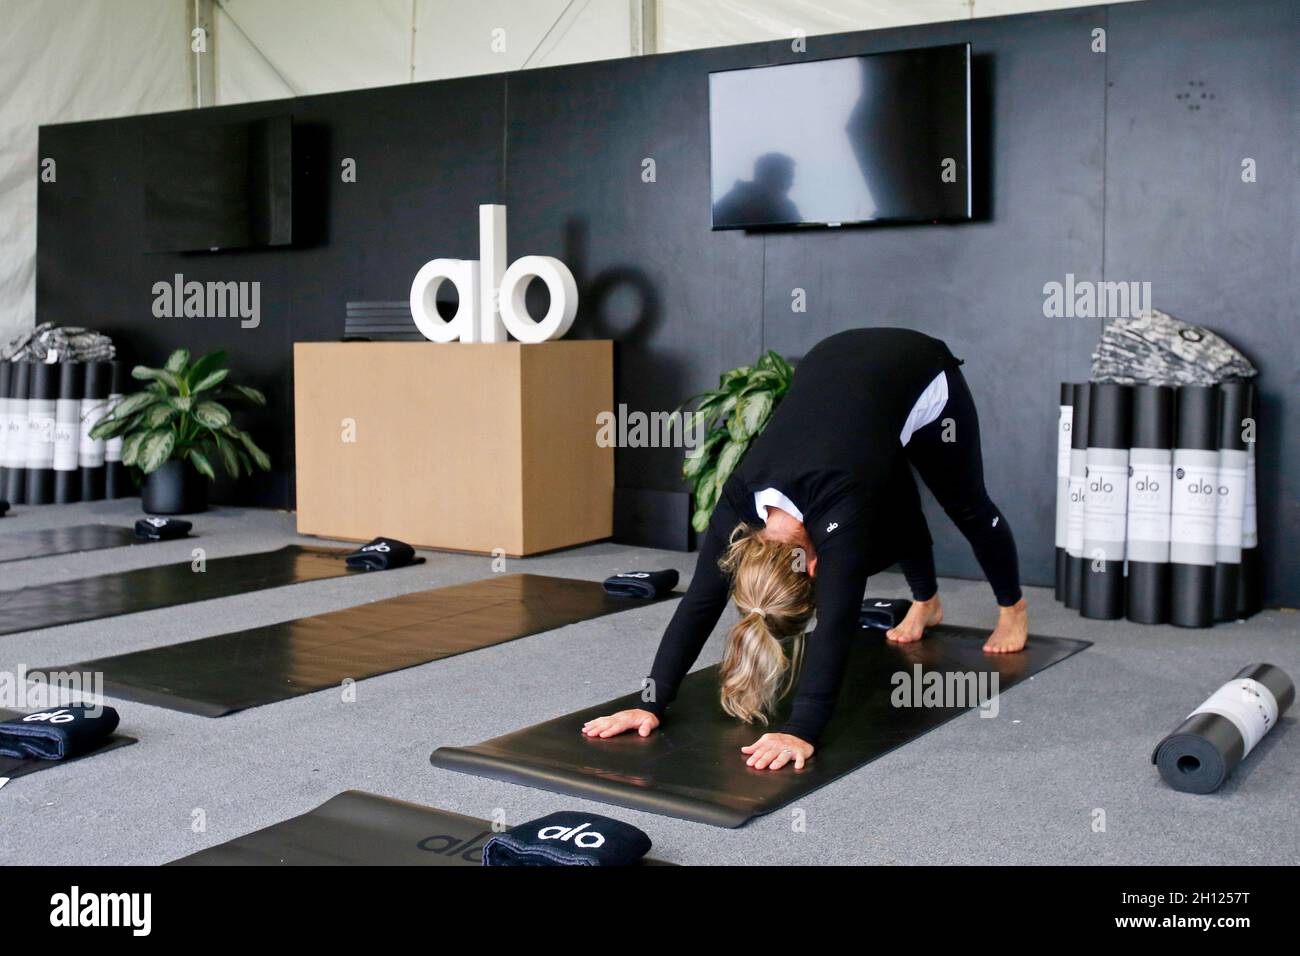 Alo yoga hi-res stock photography and images - Alamy